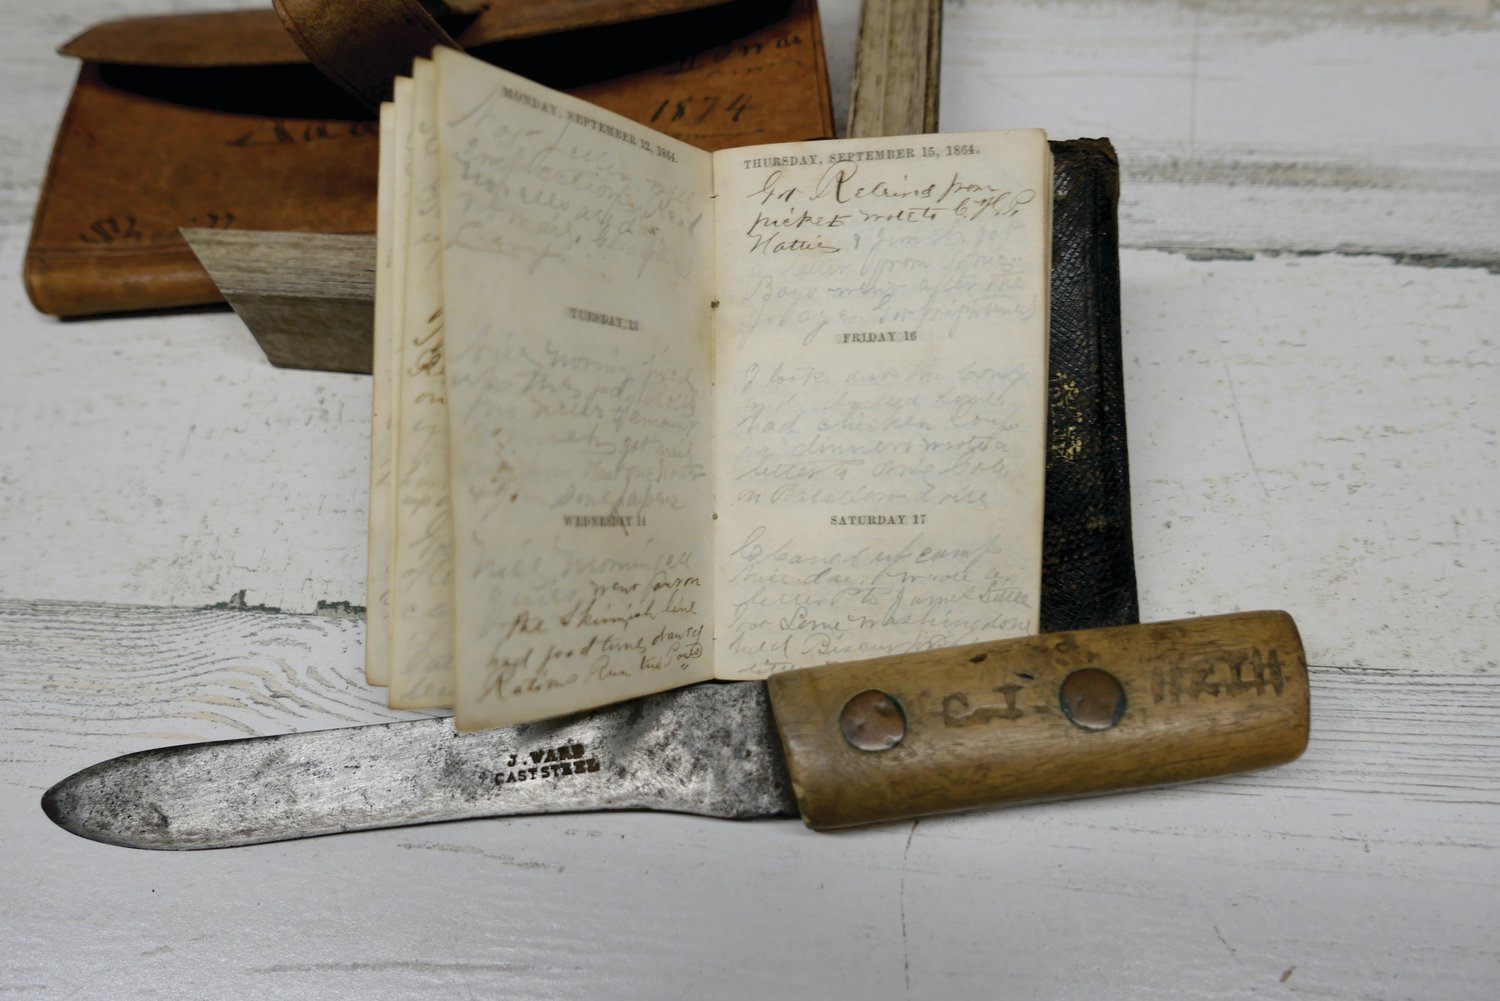 Cephas B. Hunt’s pocket diary and knife — engraved with his initials — travelled with him throughout the Civil War from Illinois to Georgia and back.